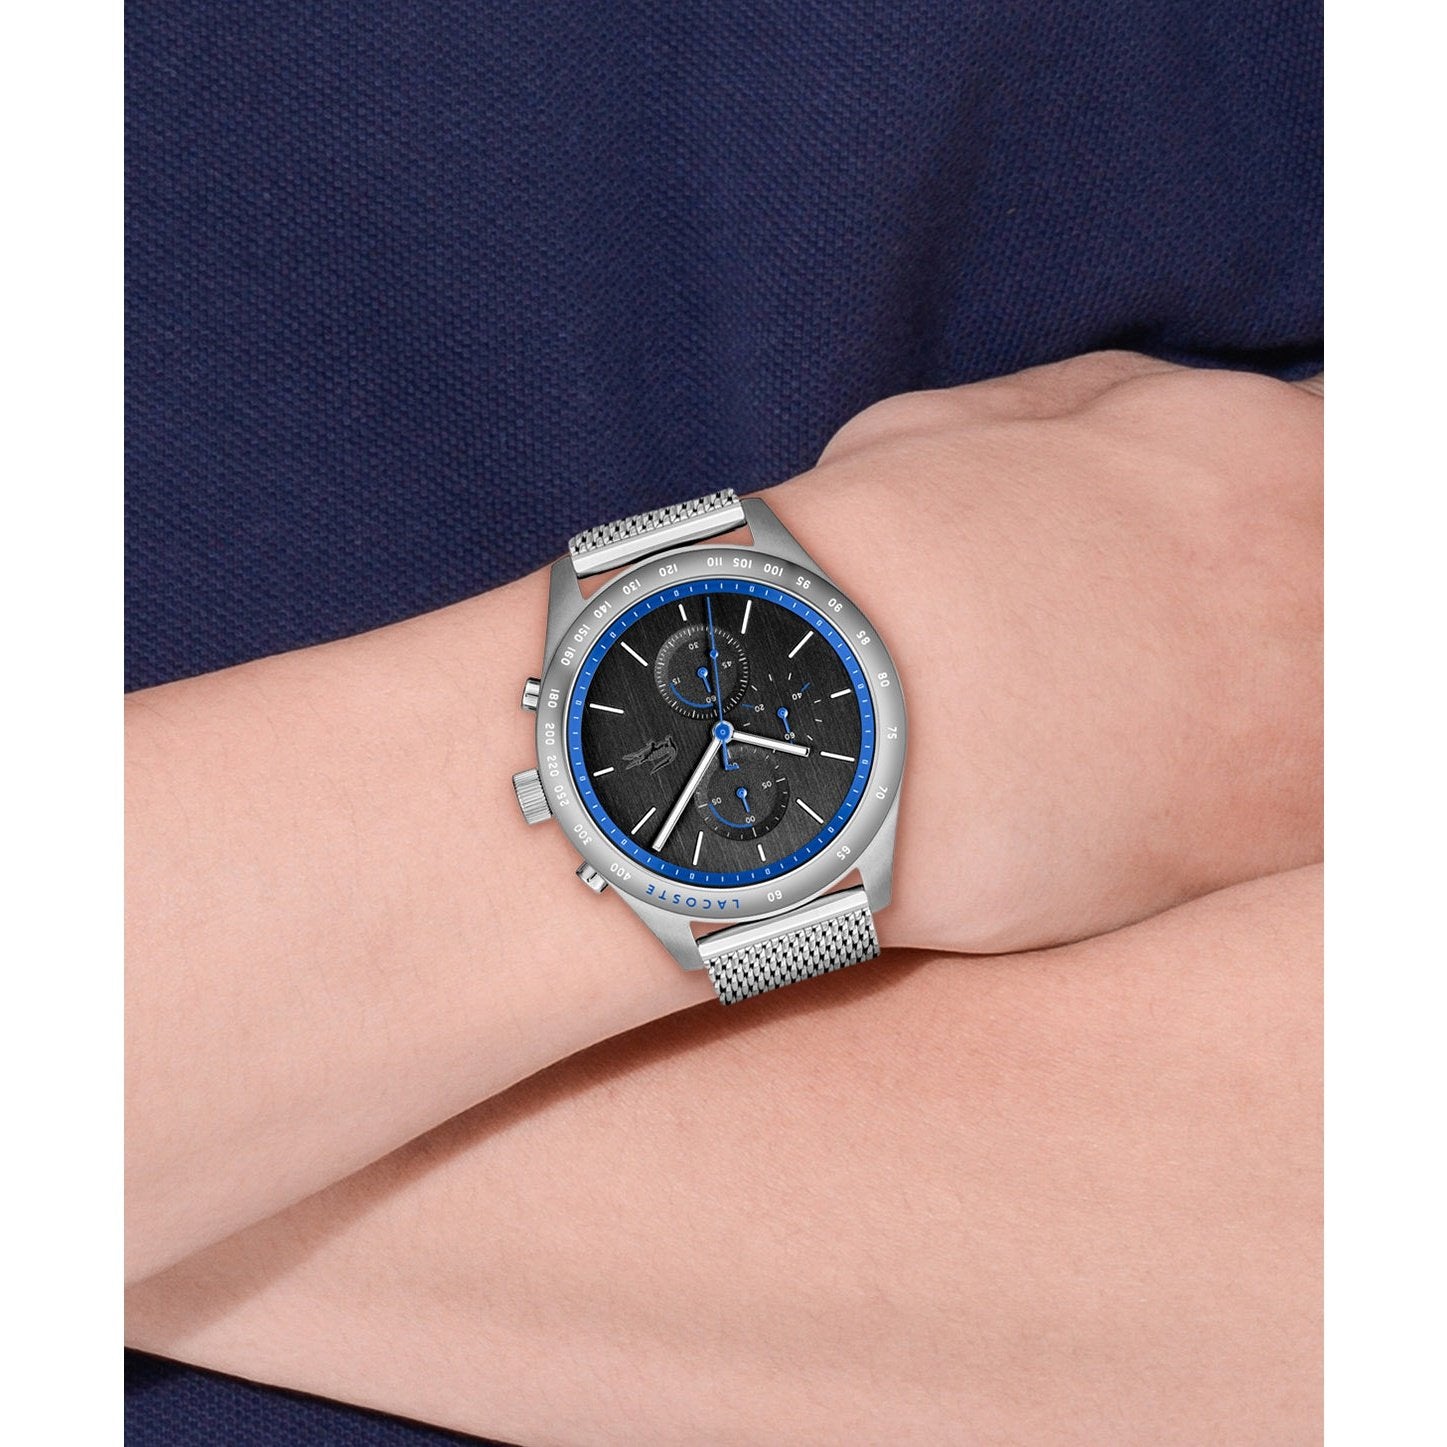 Lacoste Watches For Men and Women | Shop Online Now